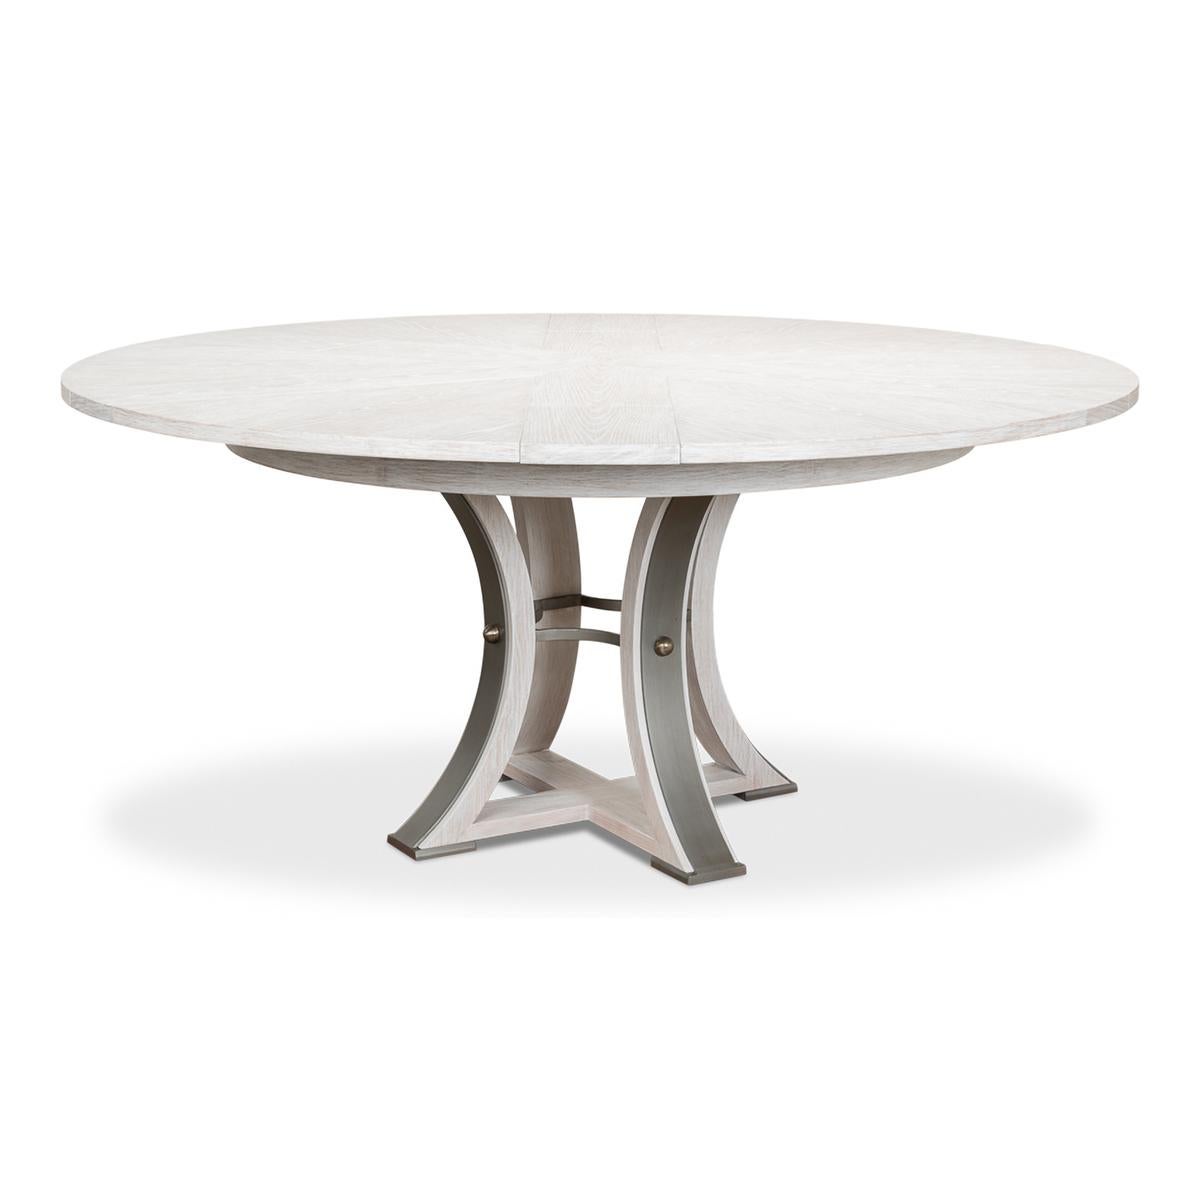 Iron Modern Industrial Dining Table - 70 - White For Sale